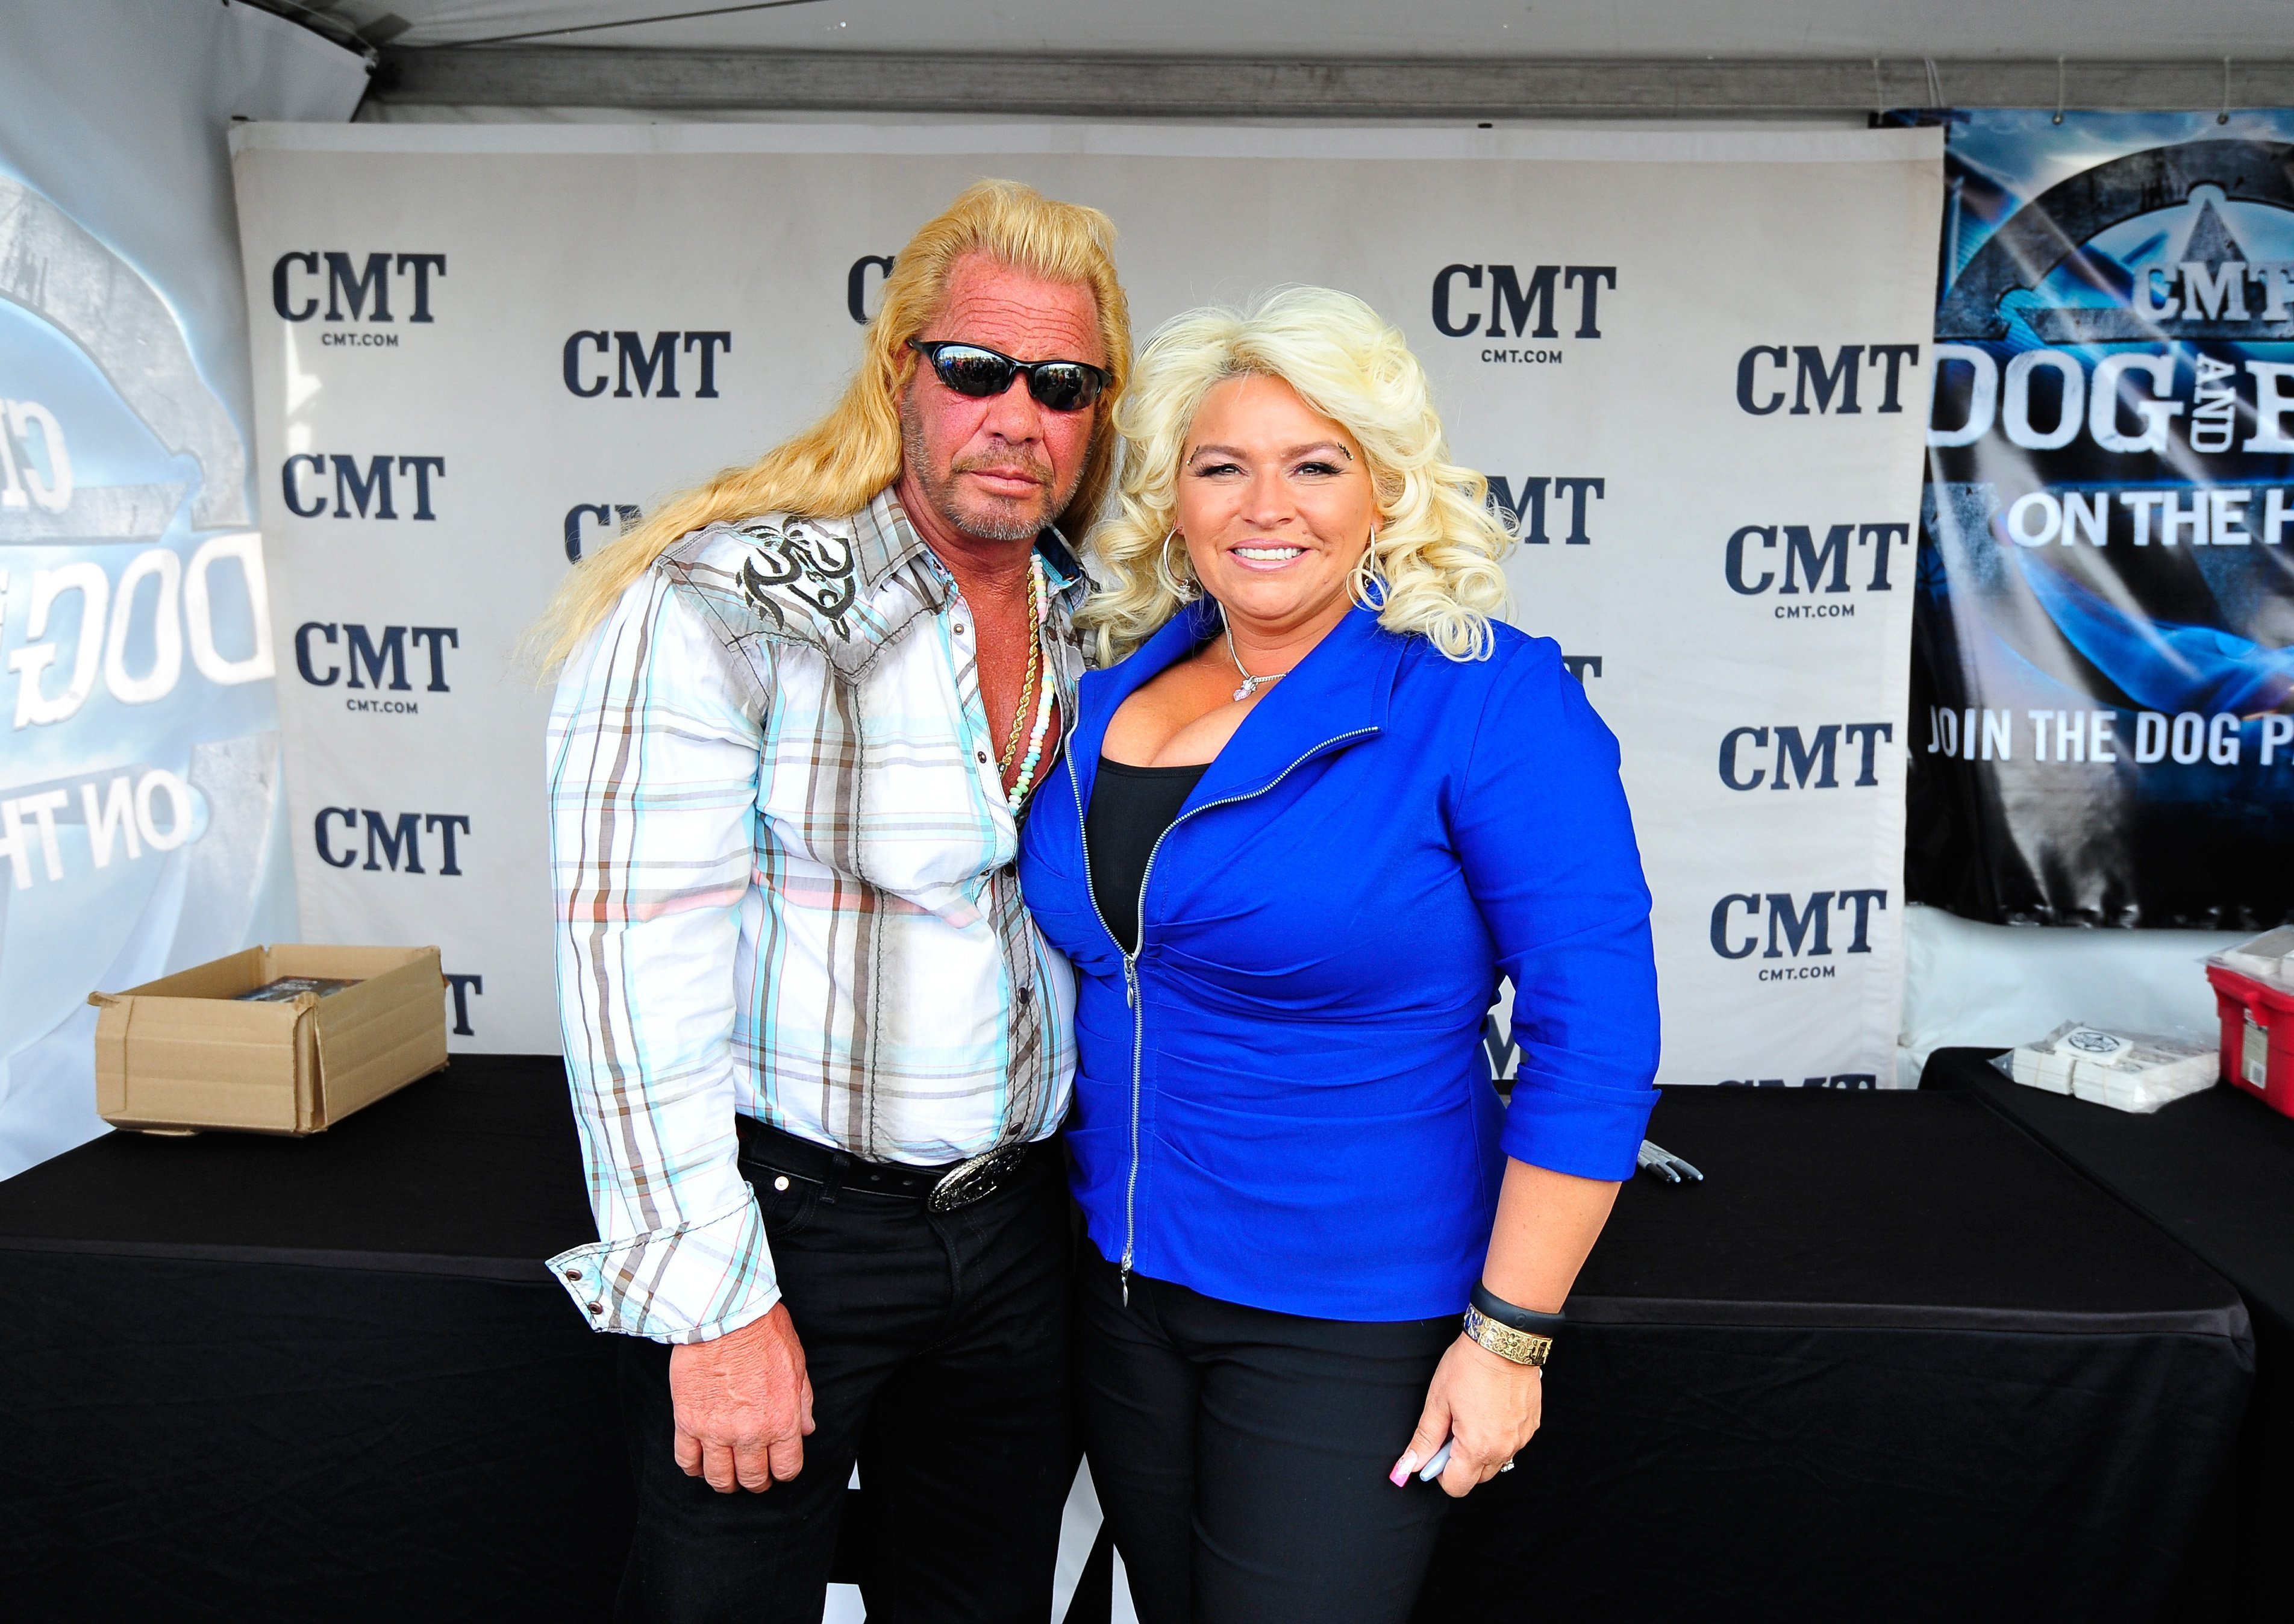 Duane 'Dog' and Beth Chapman at the ACM Experience during the 48th Annual Academy of Country Music Awards at the Orleans Arena on April 5, 2013 in Las Vegas, Nevada | Photo: Getty Images